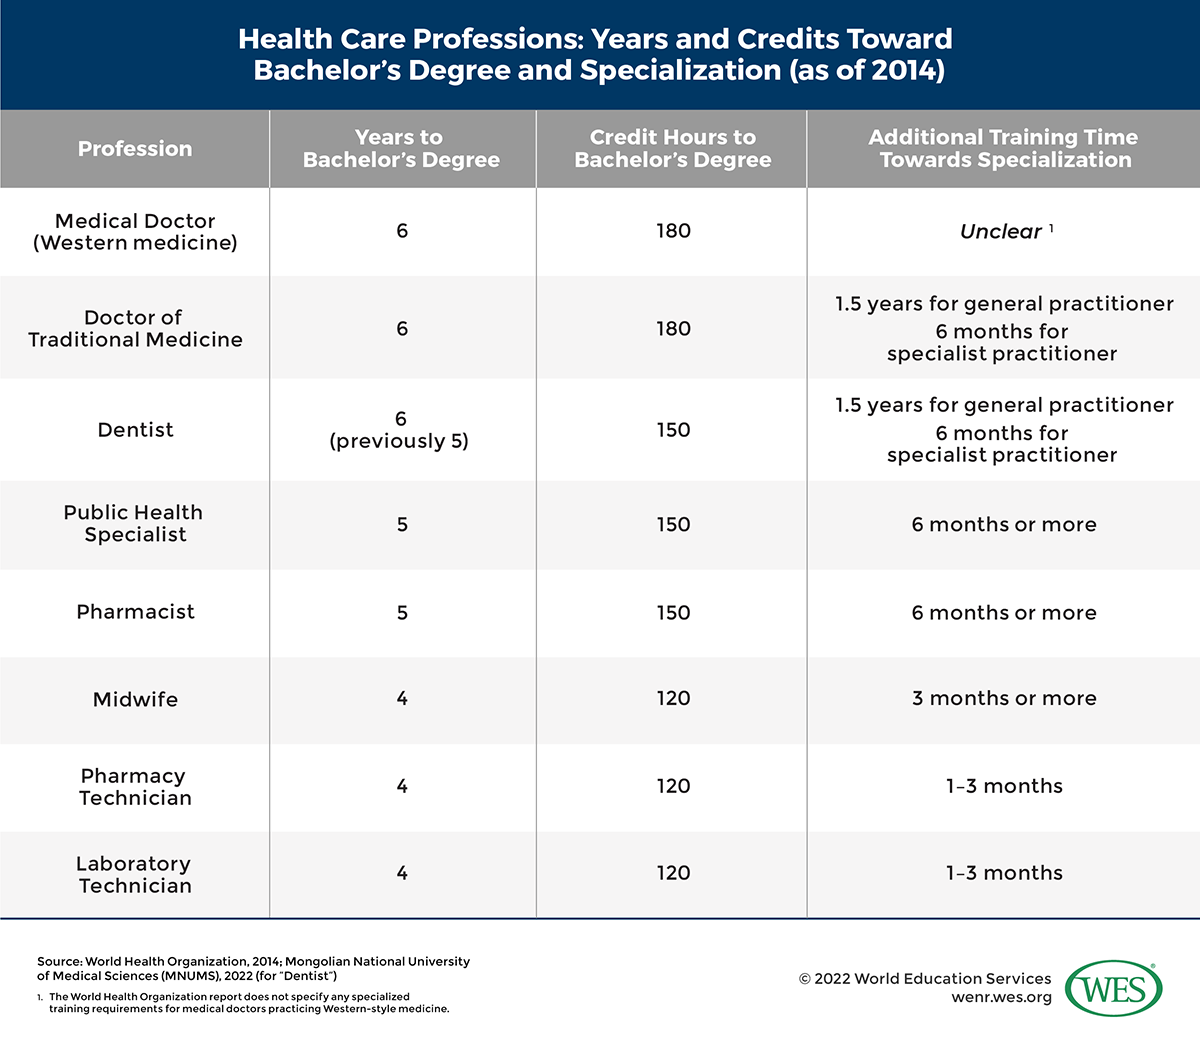 A table displaying the years and credits needed for health care bachelor's degrees and specialization programs as of 2014. 